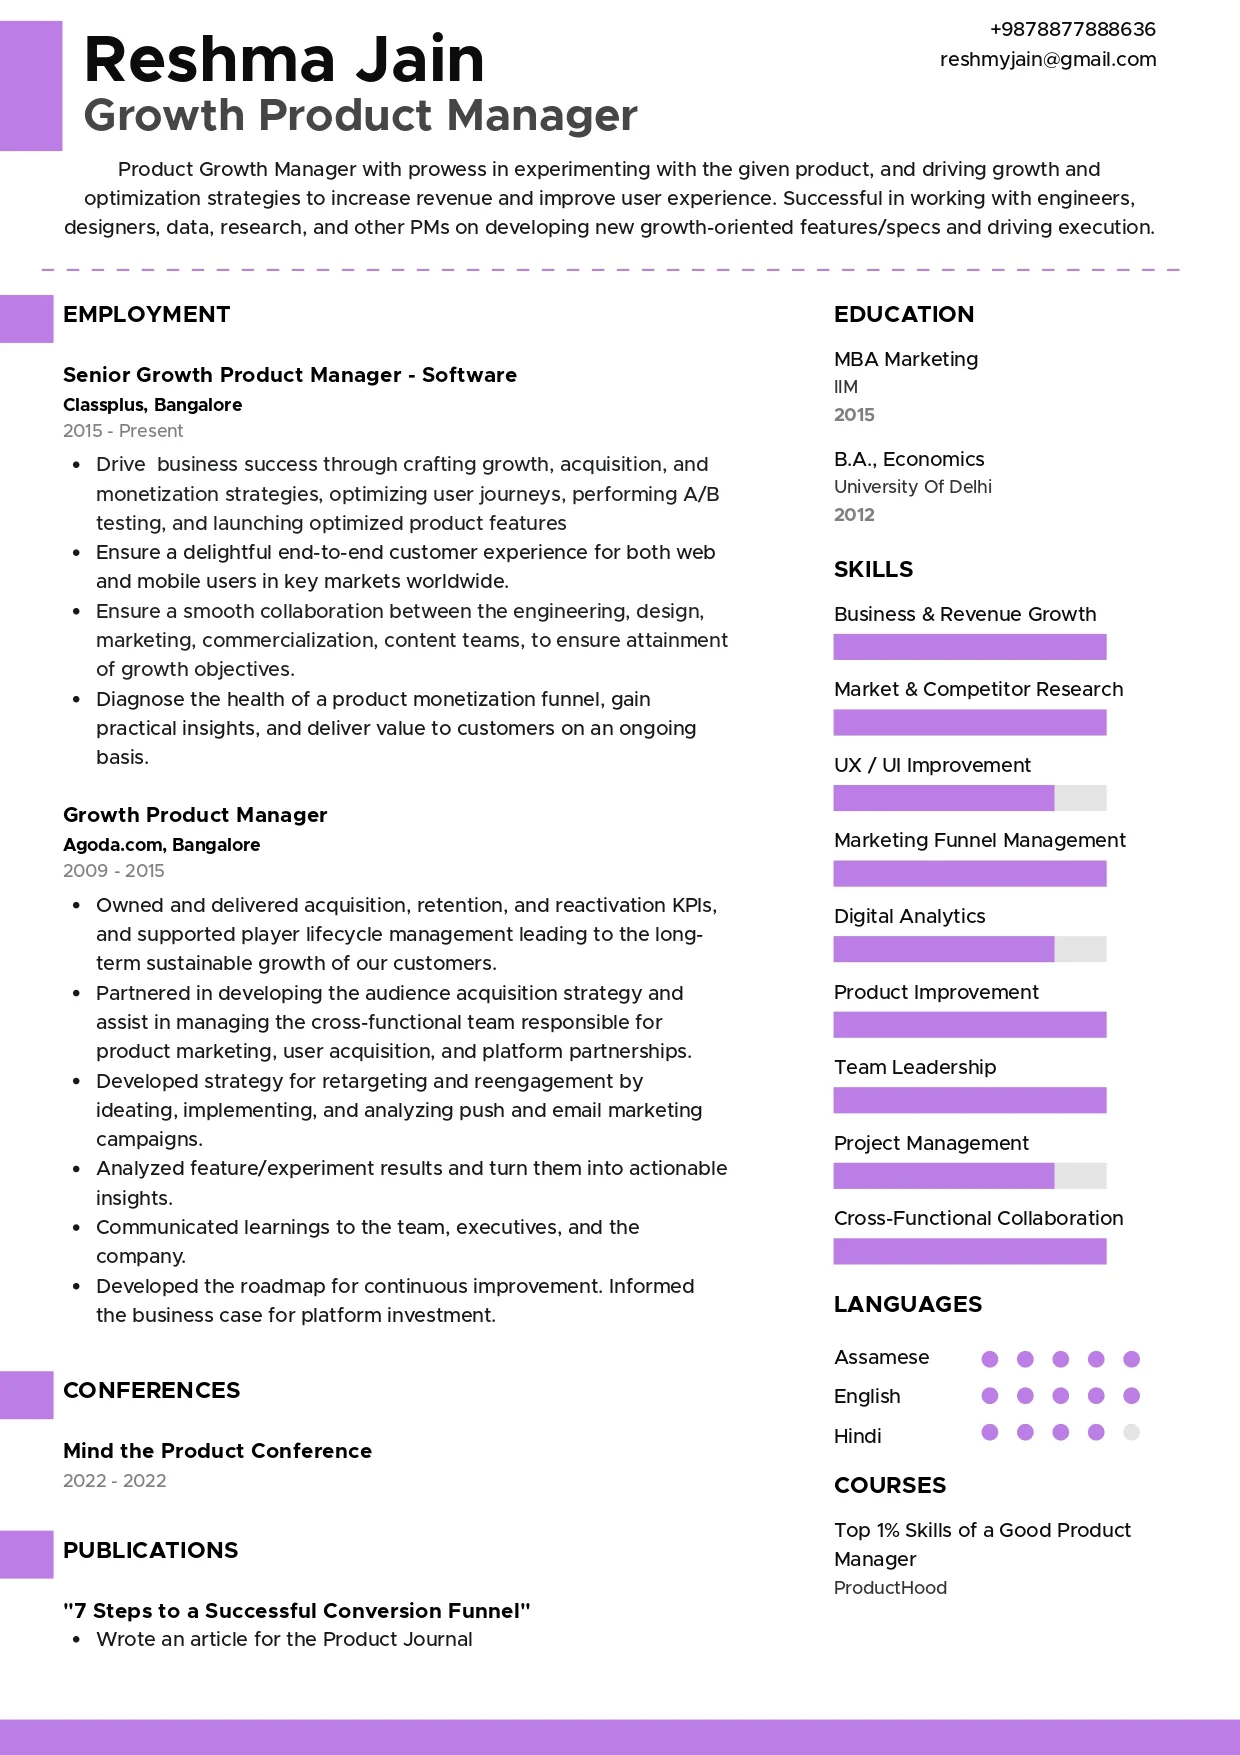 Sample Resume of Growth Product Manager | Free Resume Templates & Samples on Resumod.co